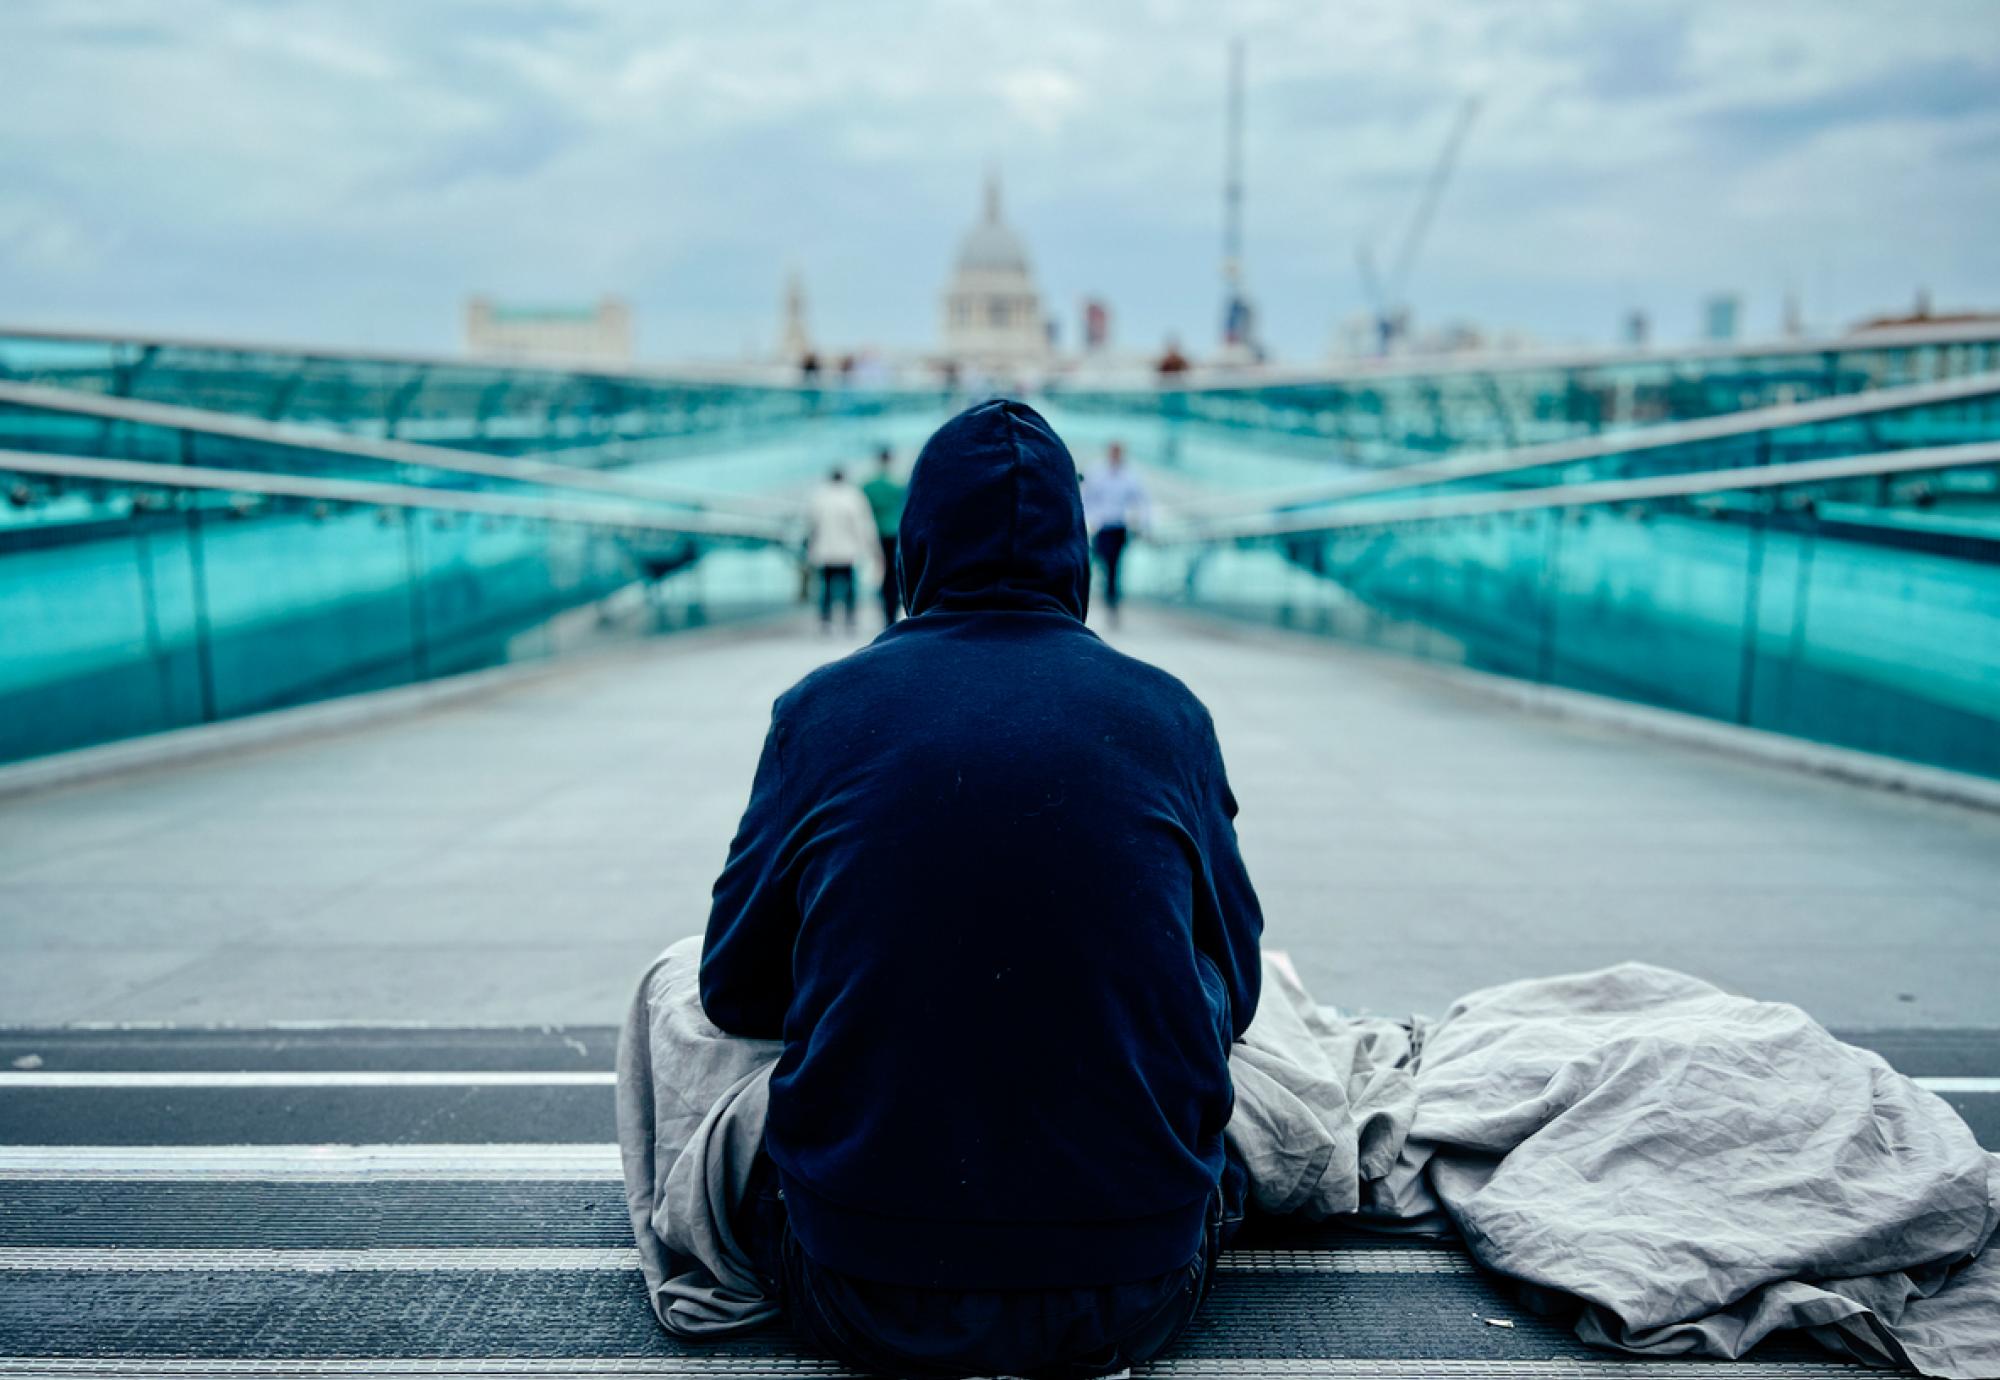 Homeless man in London with St Paul's Cathedral in the background